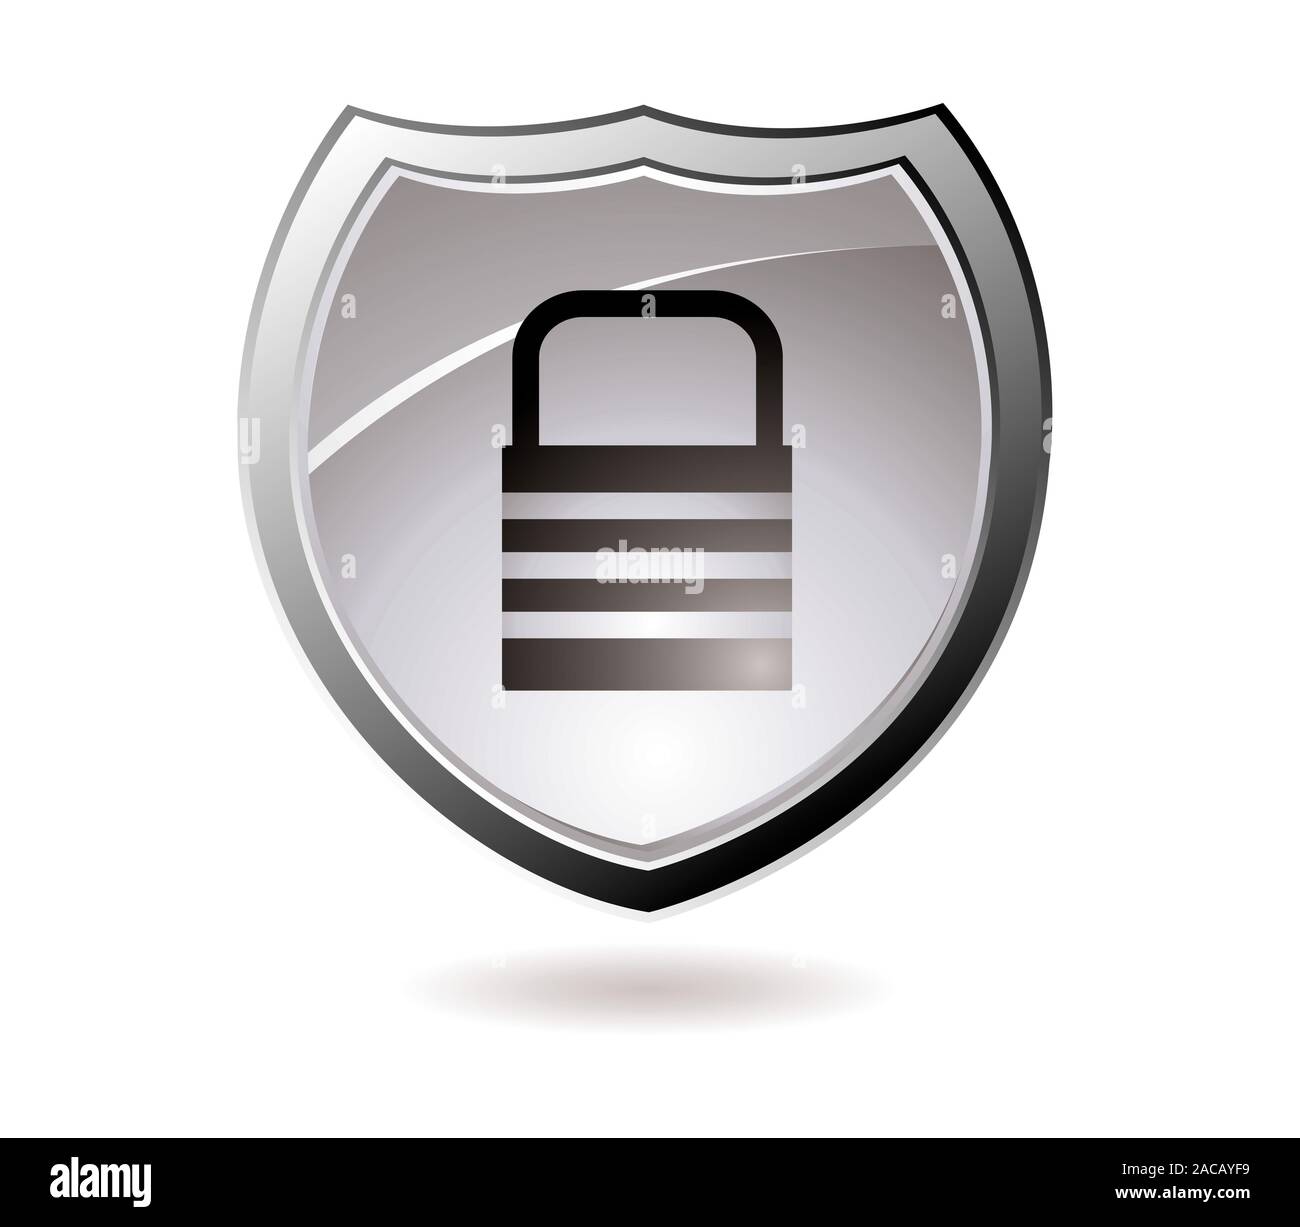 Secure shield Stock Photo